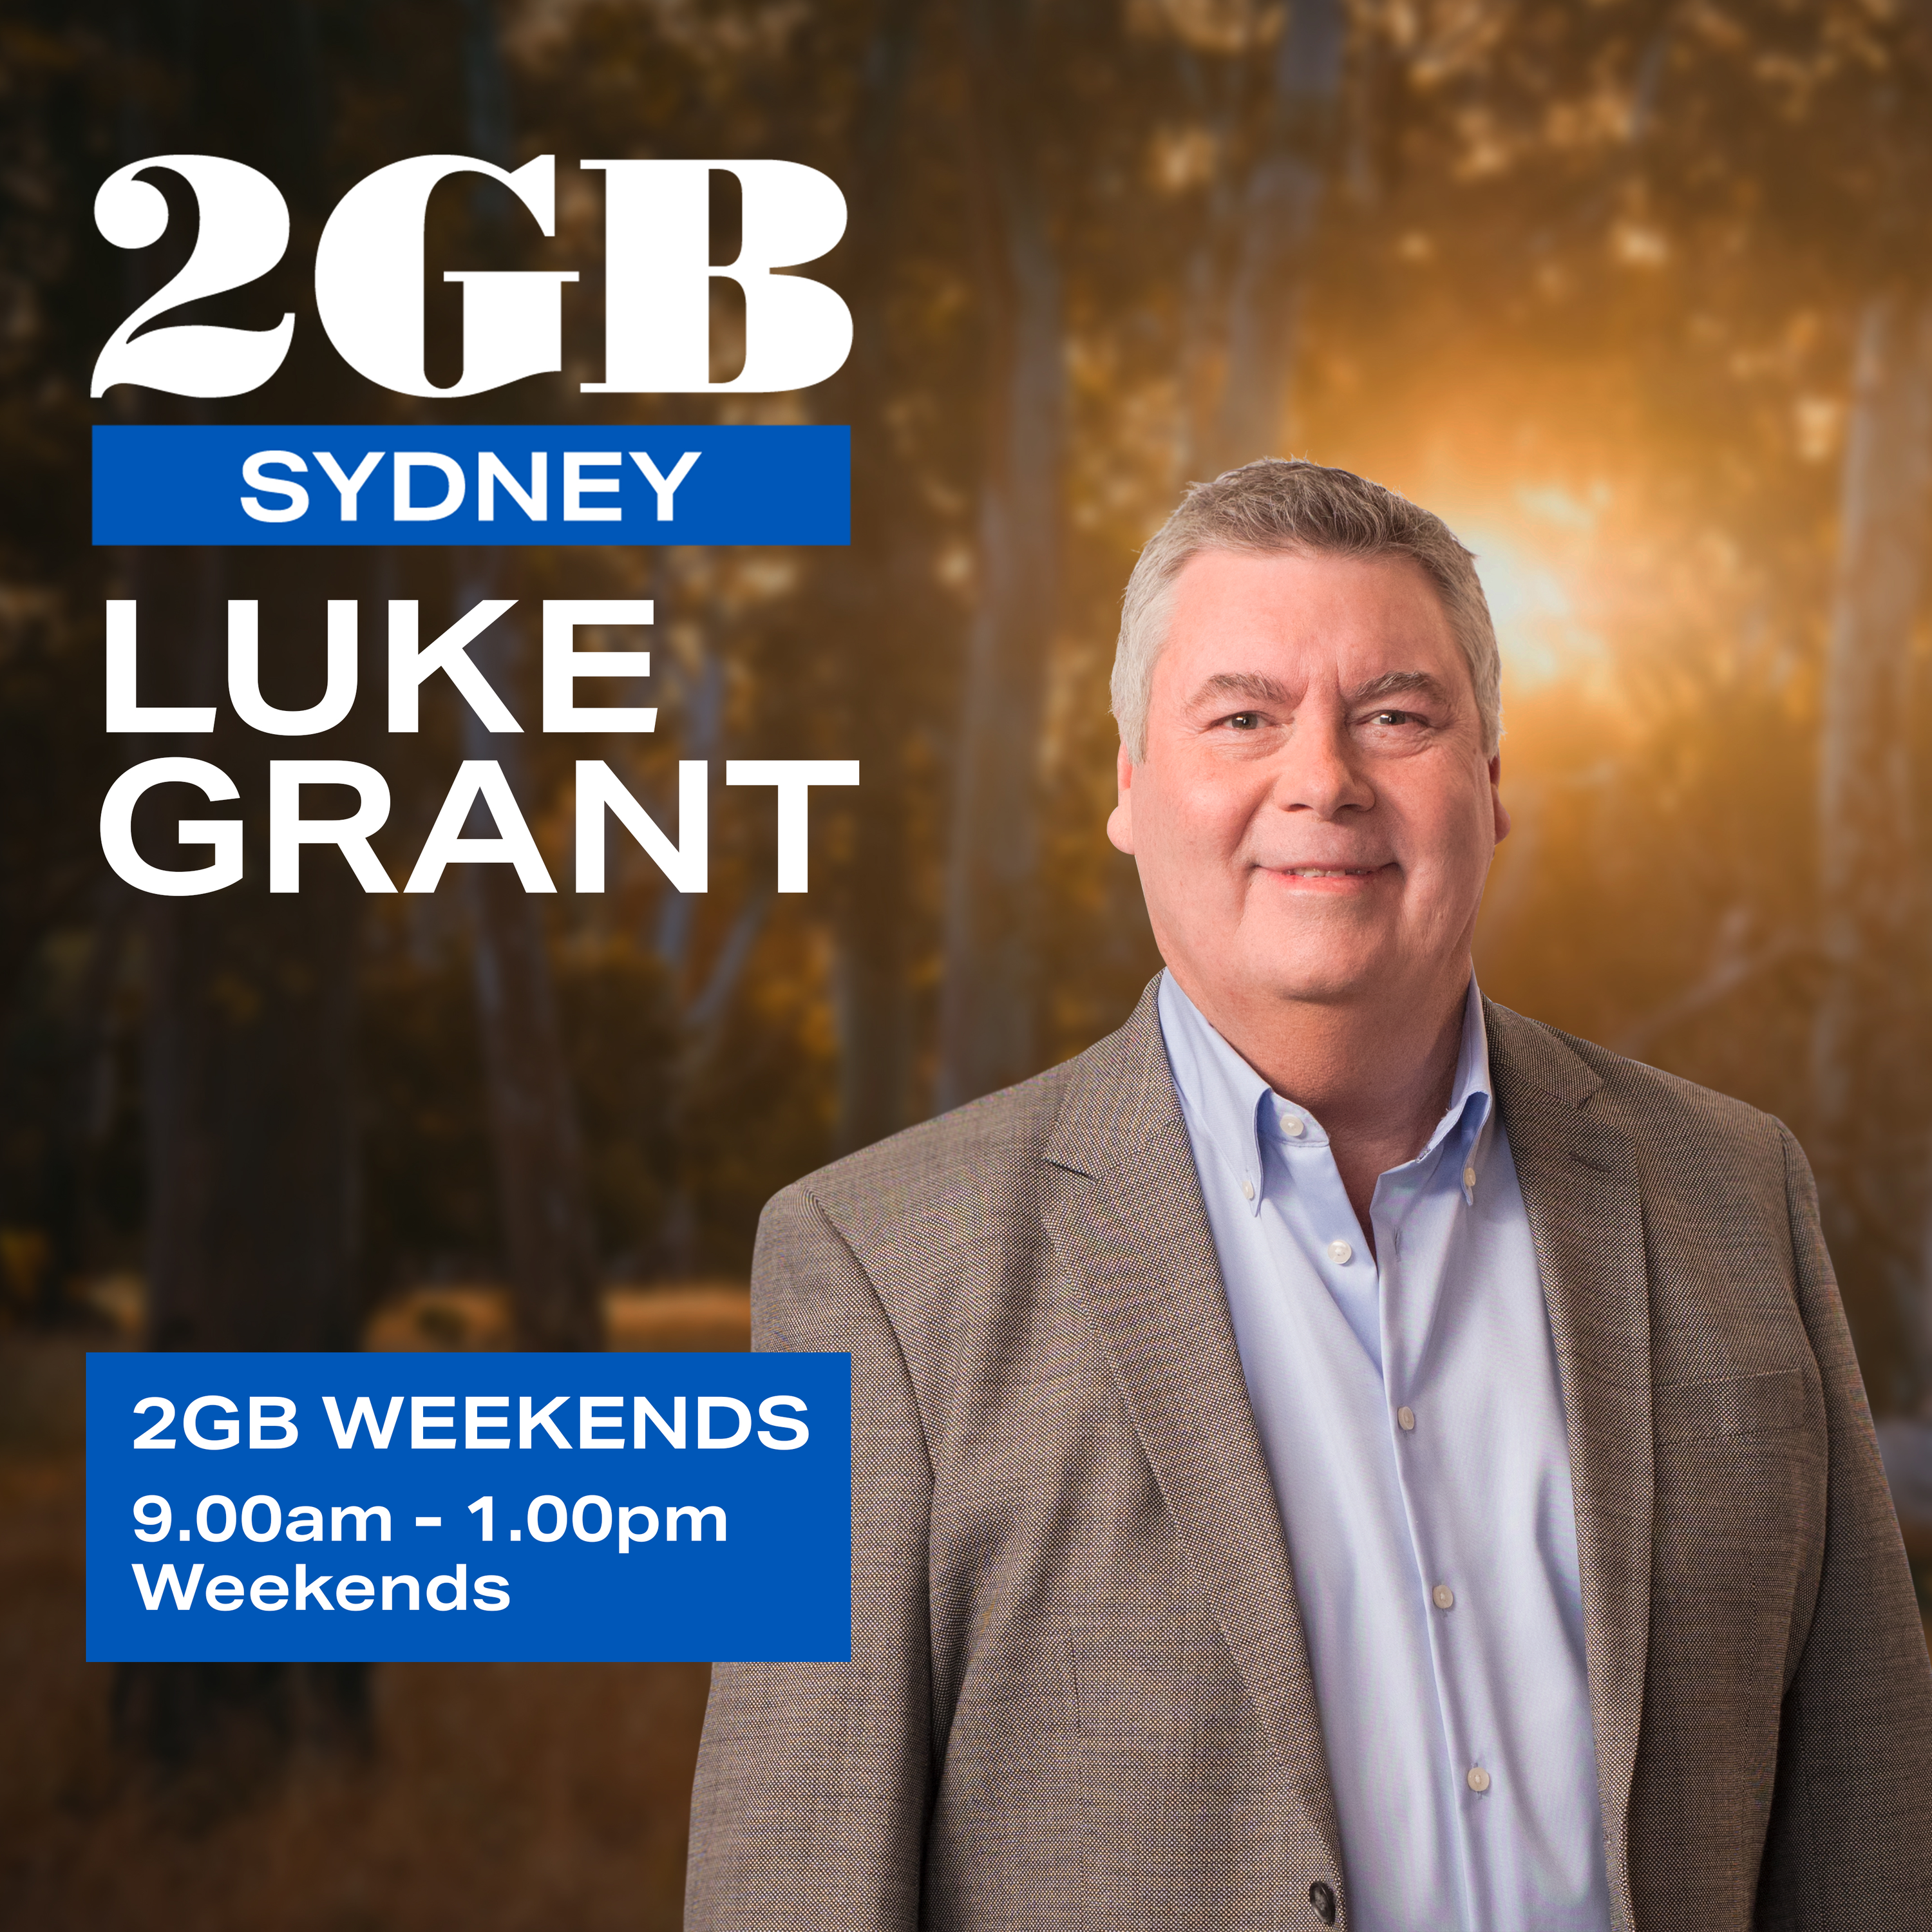 Weekends with Luke Grant - Sunday, 24th of March